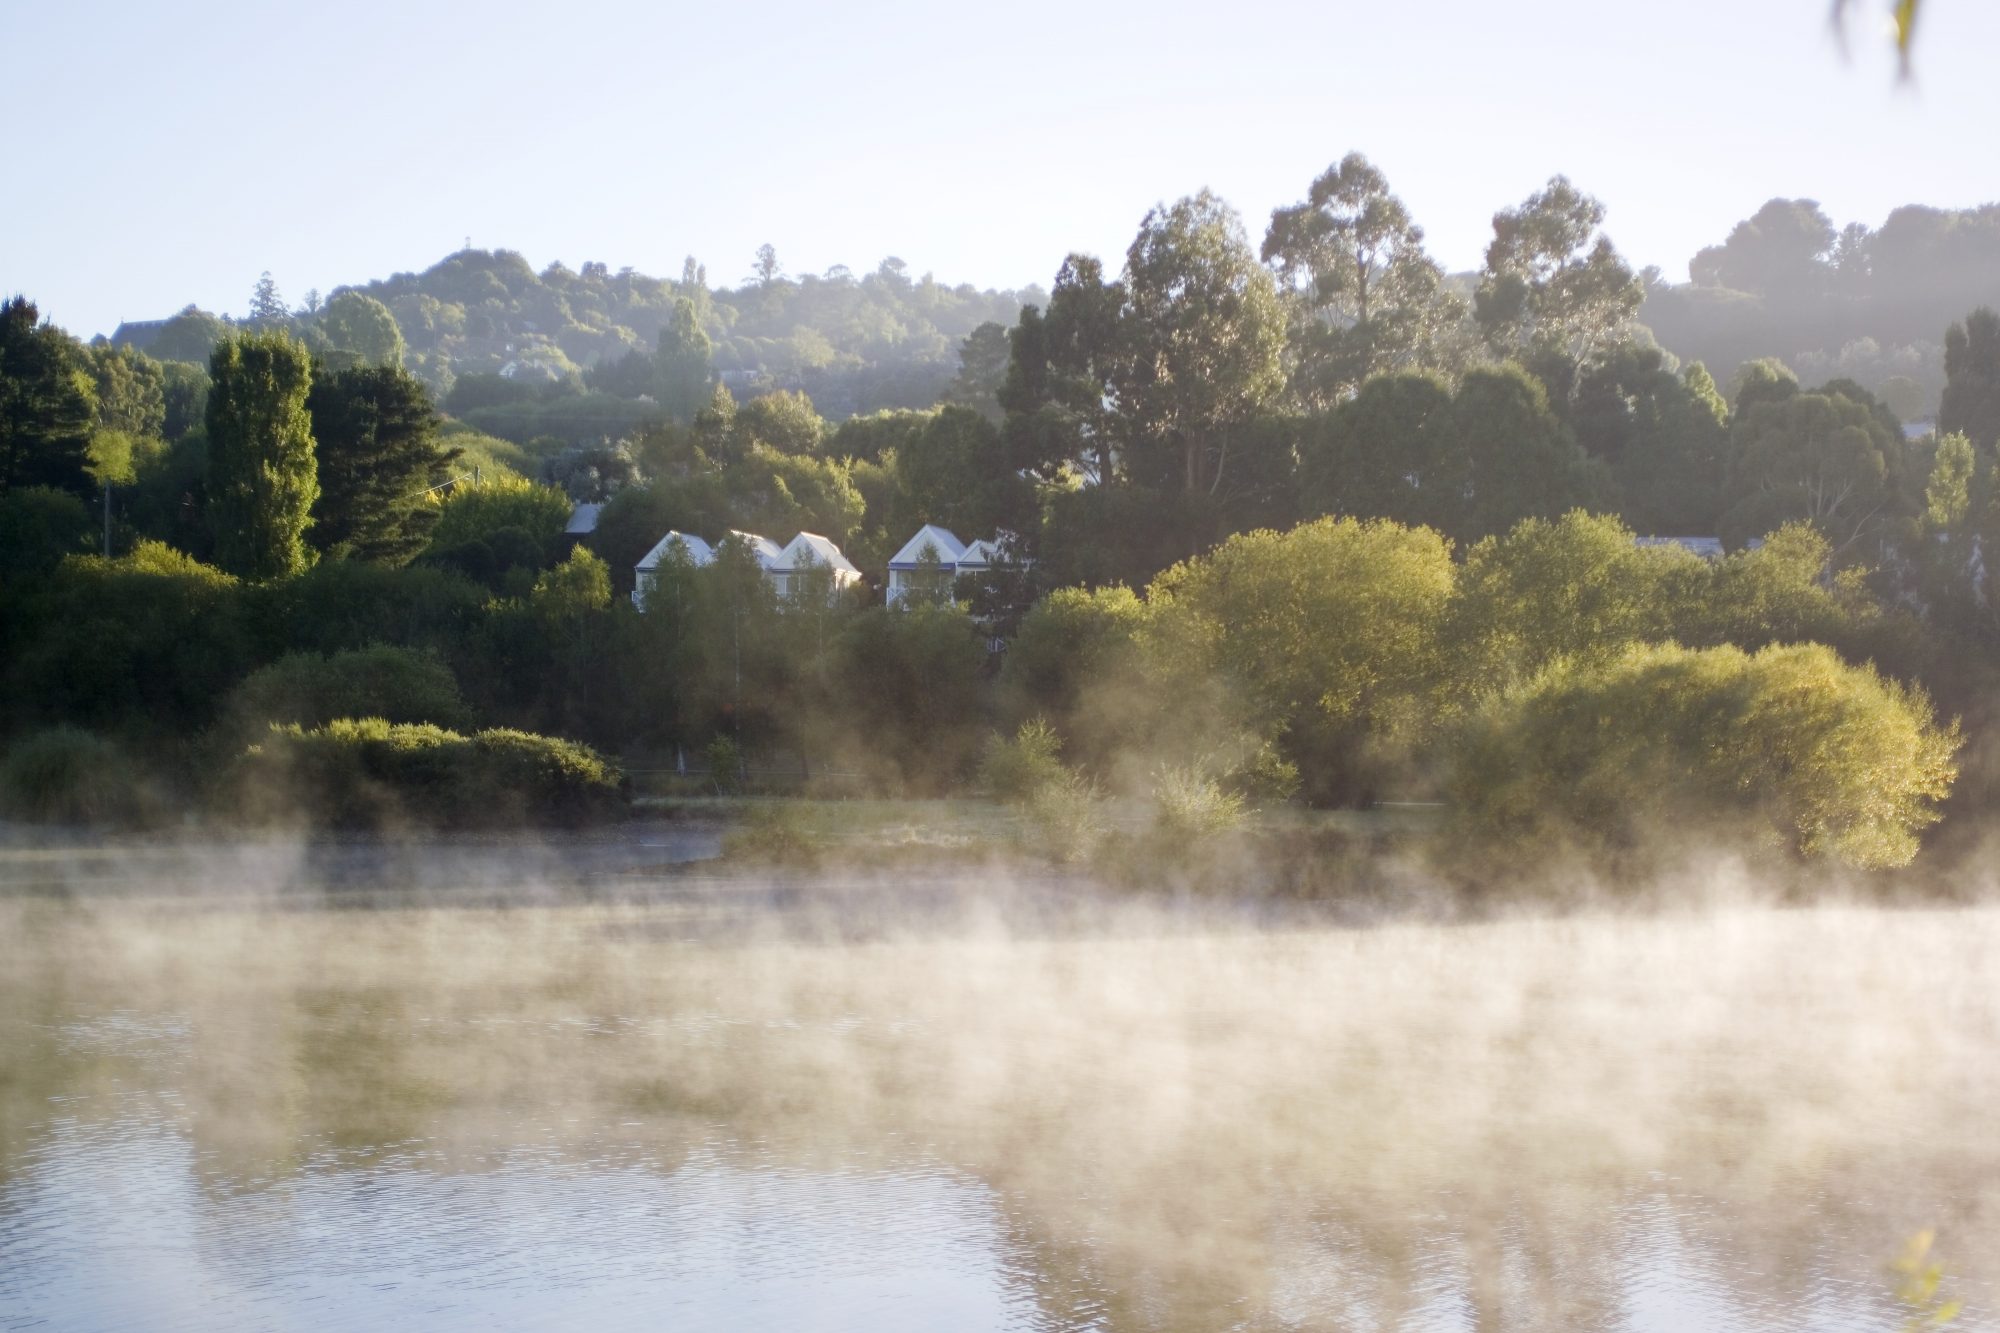 Lake House across the misty lake|Hotel Frangos in the centre of Daylesford Town|One of the stunning baths at the Hepburn Bathhouse & Spa|Wombat State Forest|Sharon Flynn of The Fermentary